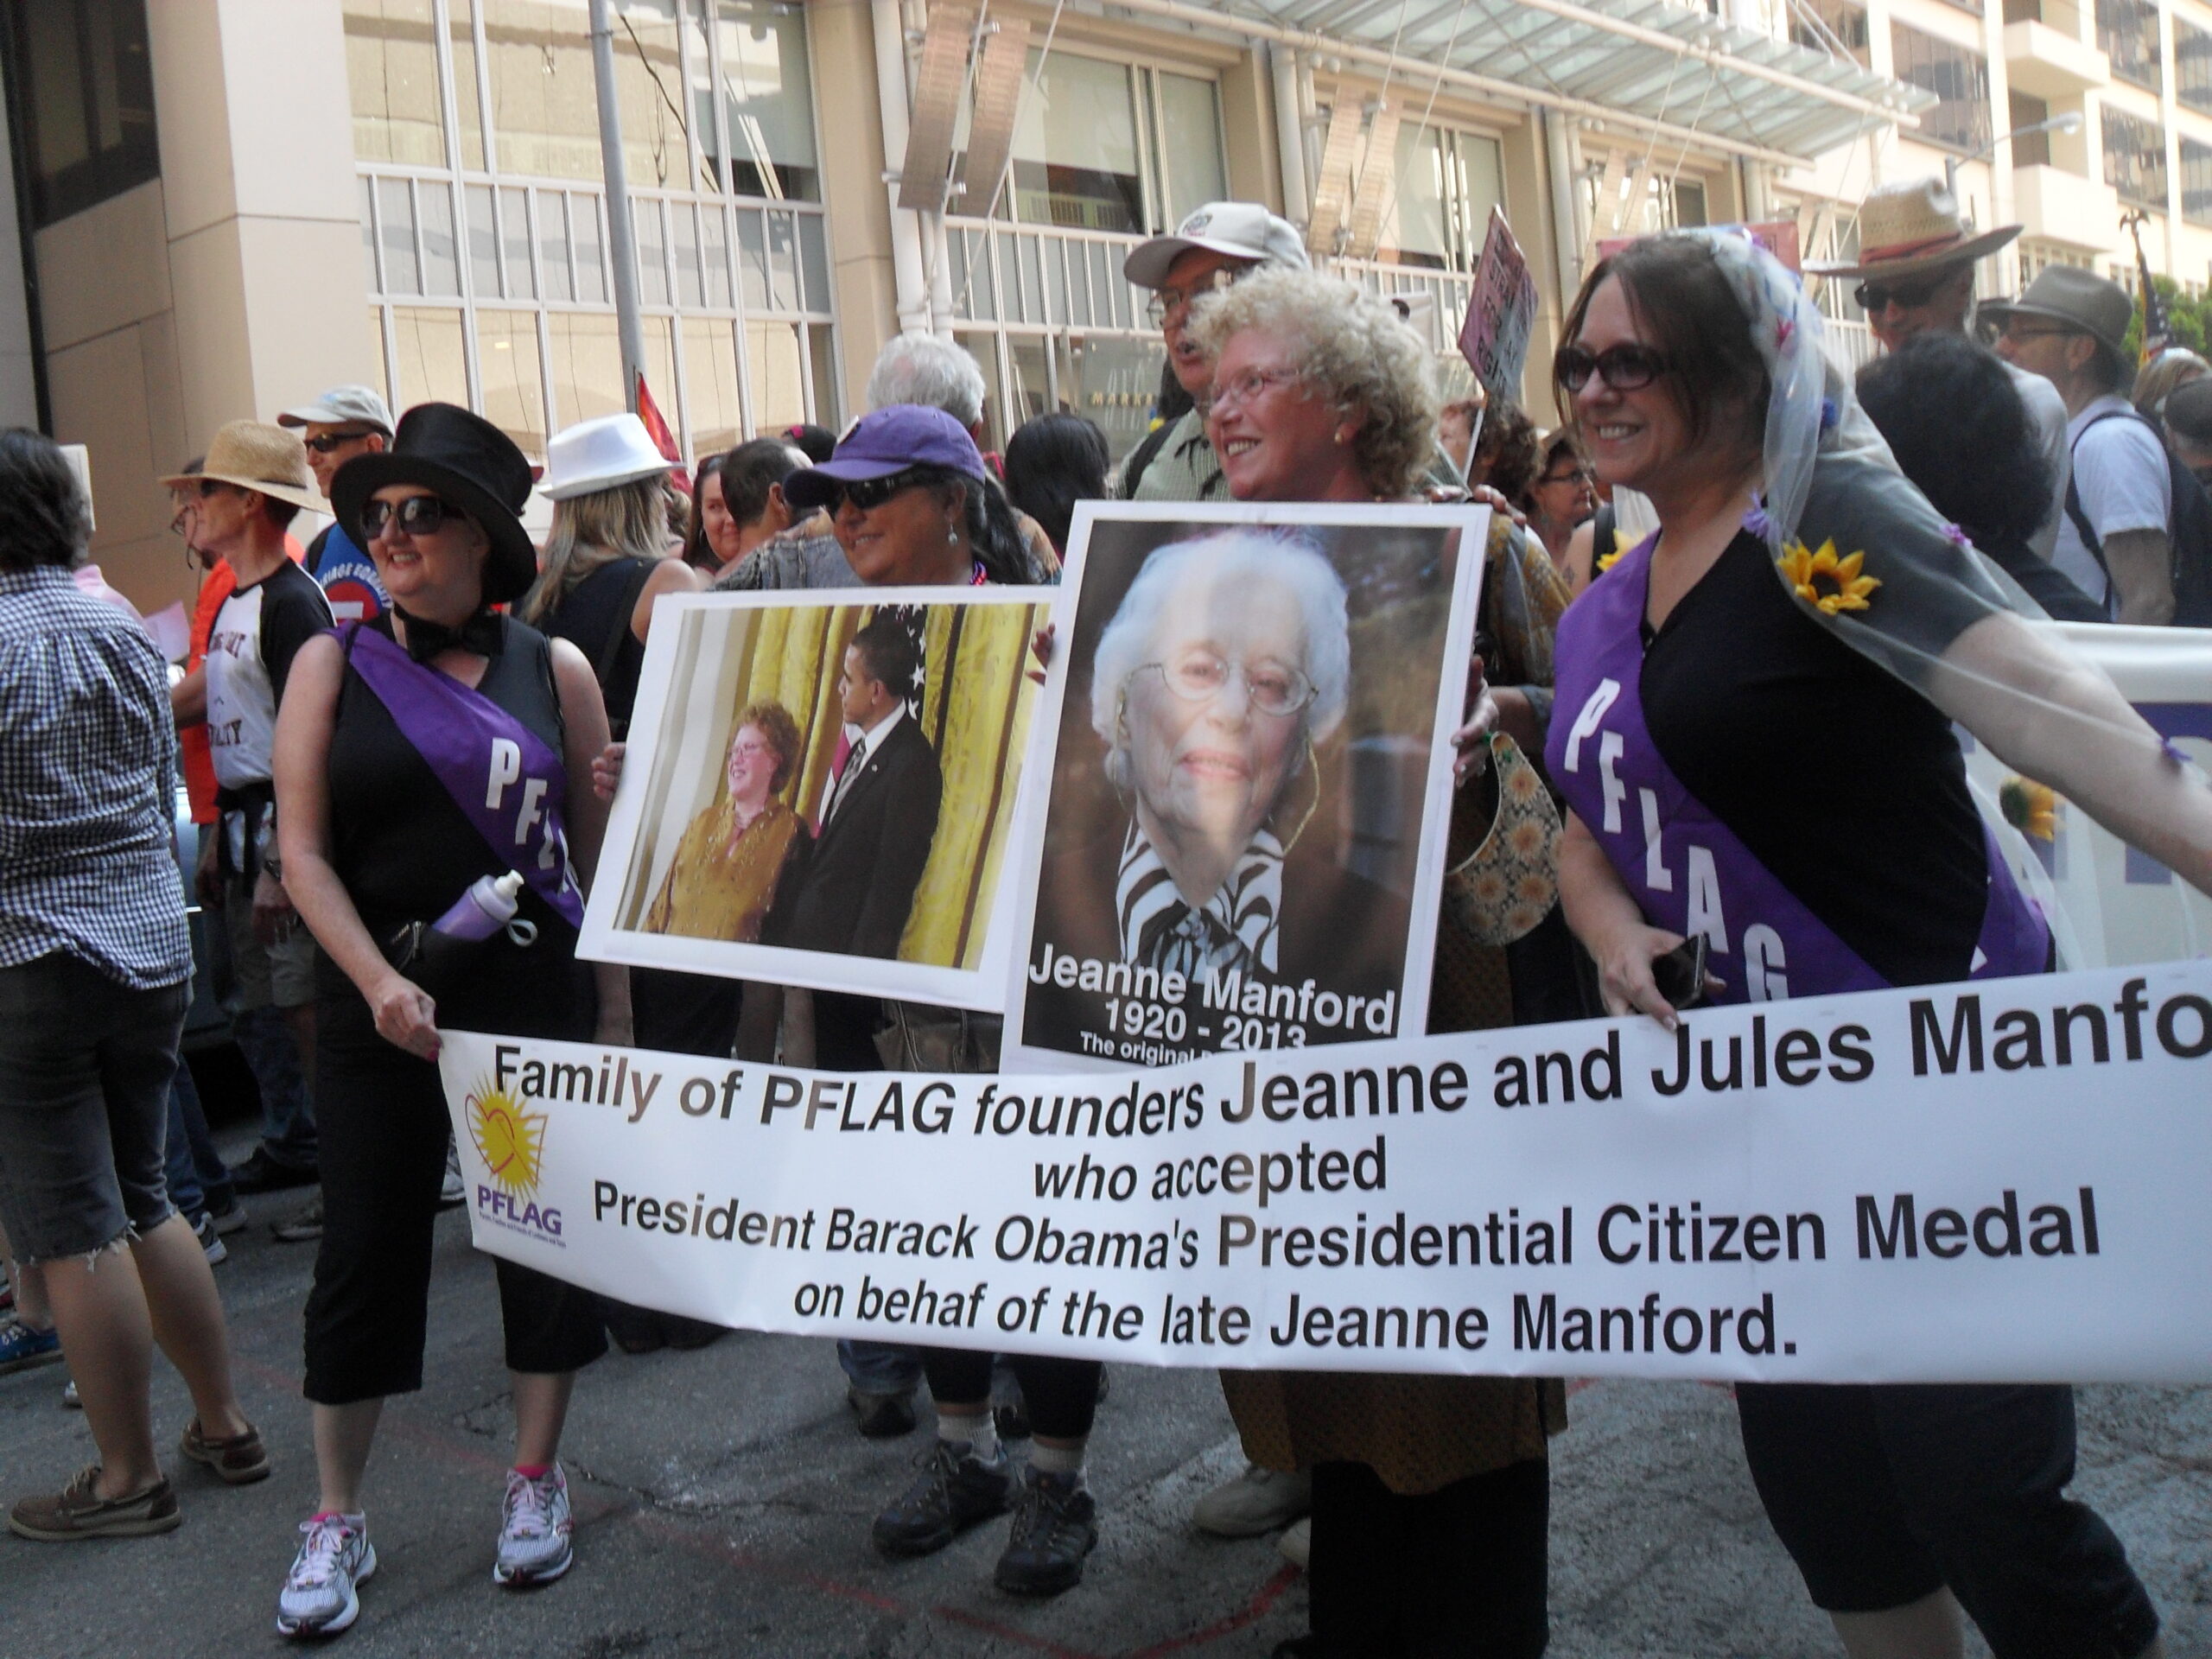 Family of PFLAG founders Jeanne and Jules Manford